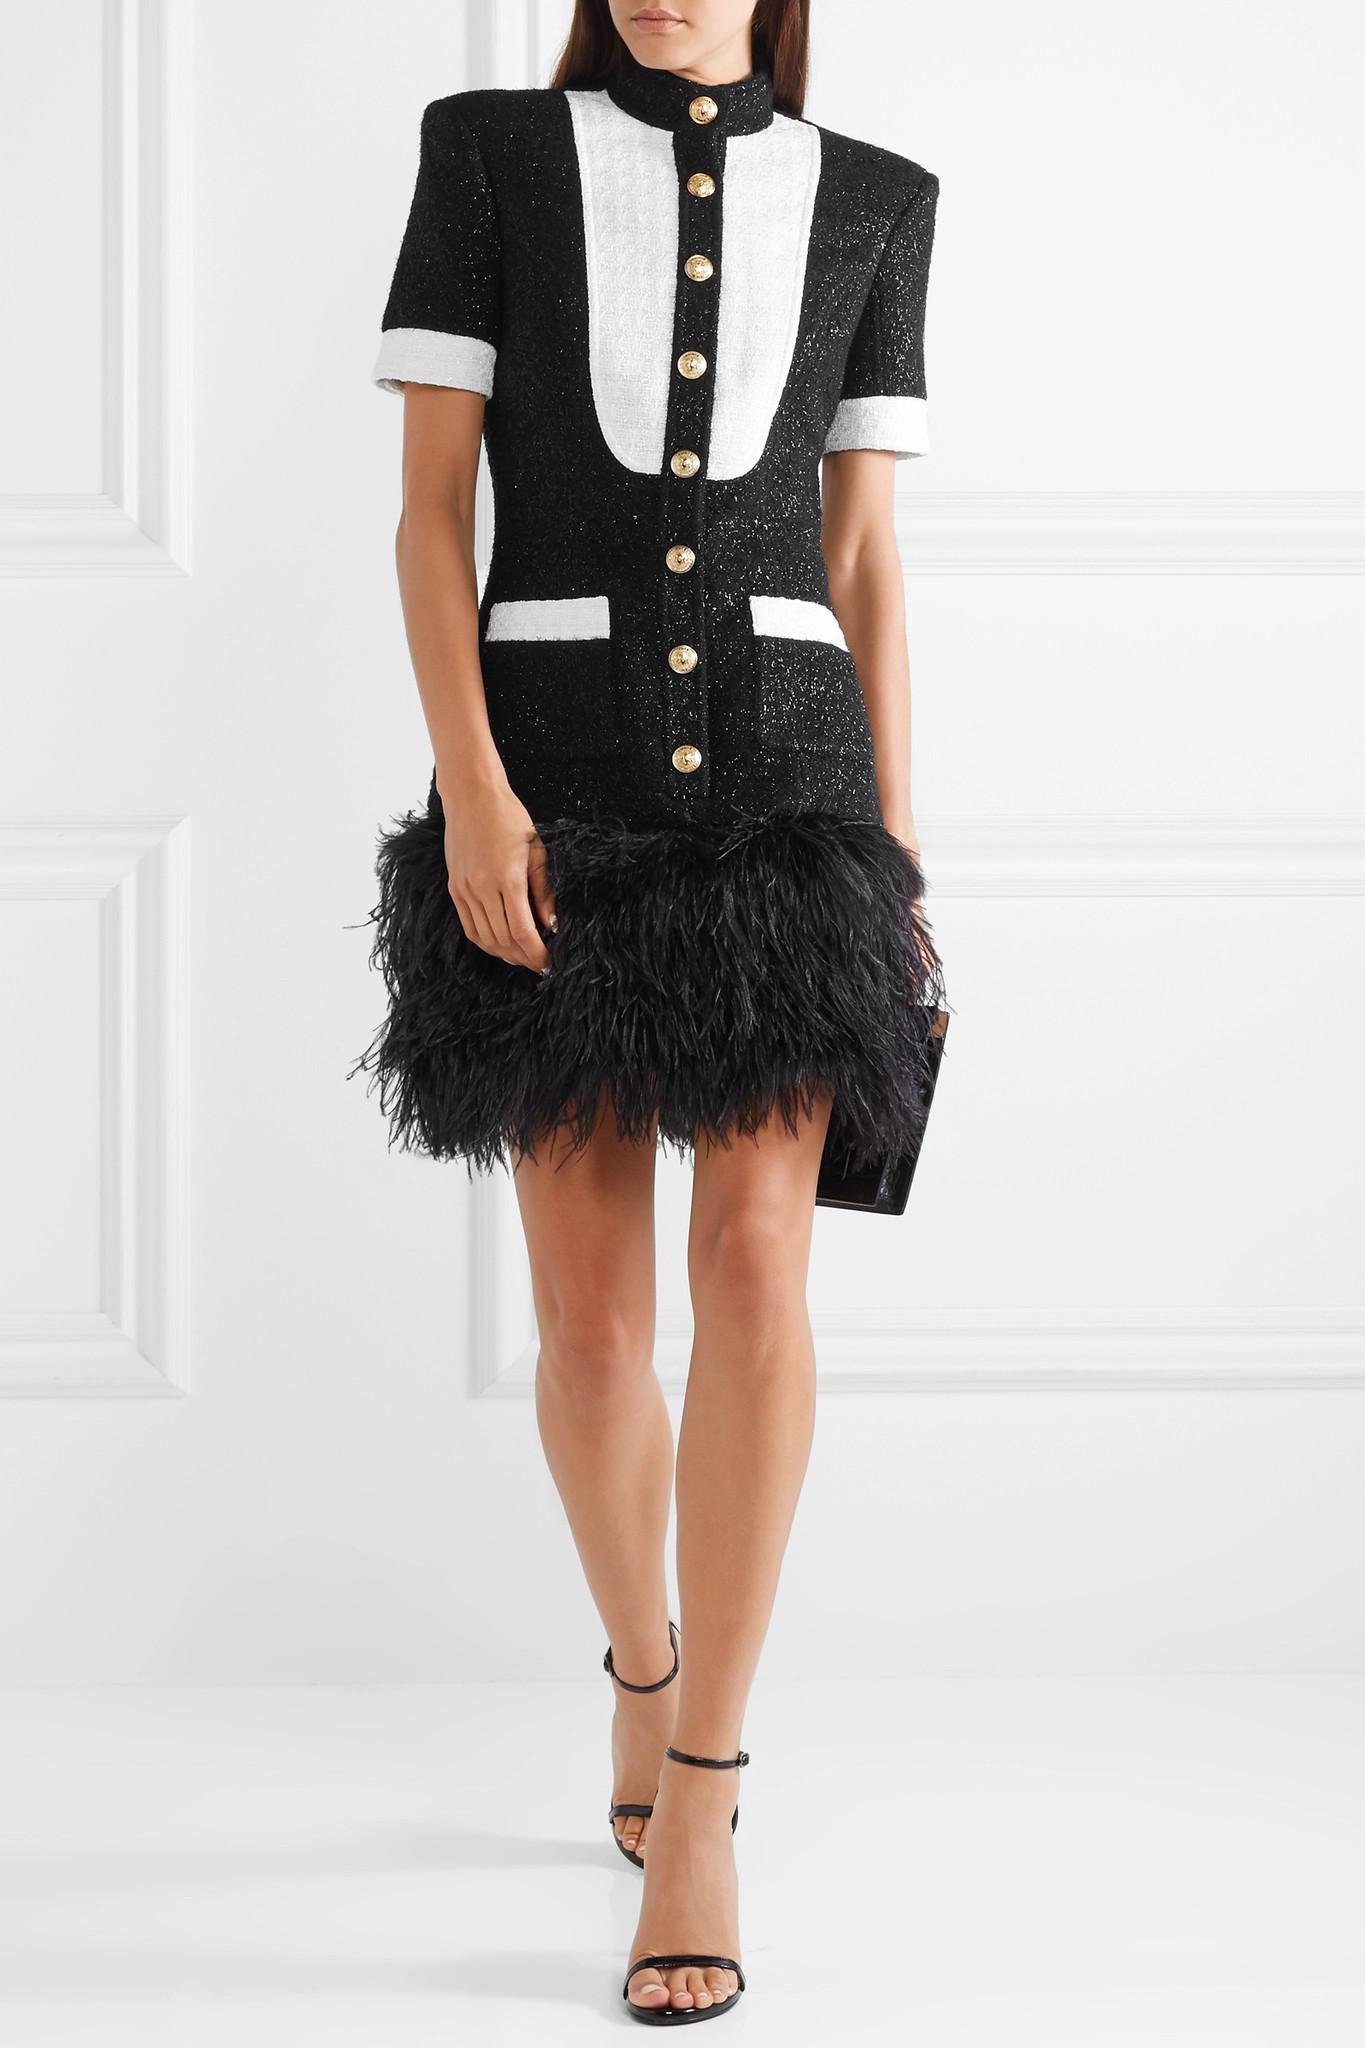 Balmain Metallic Tweed Dress With Ostrich Feathers in Black - Lyst